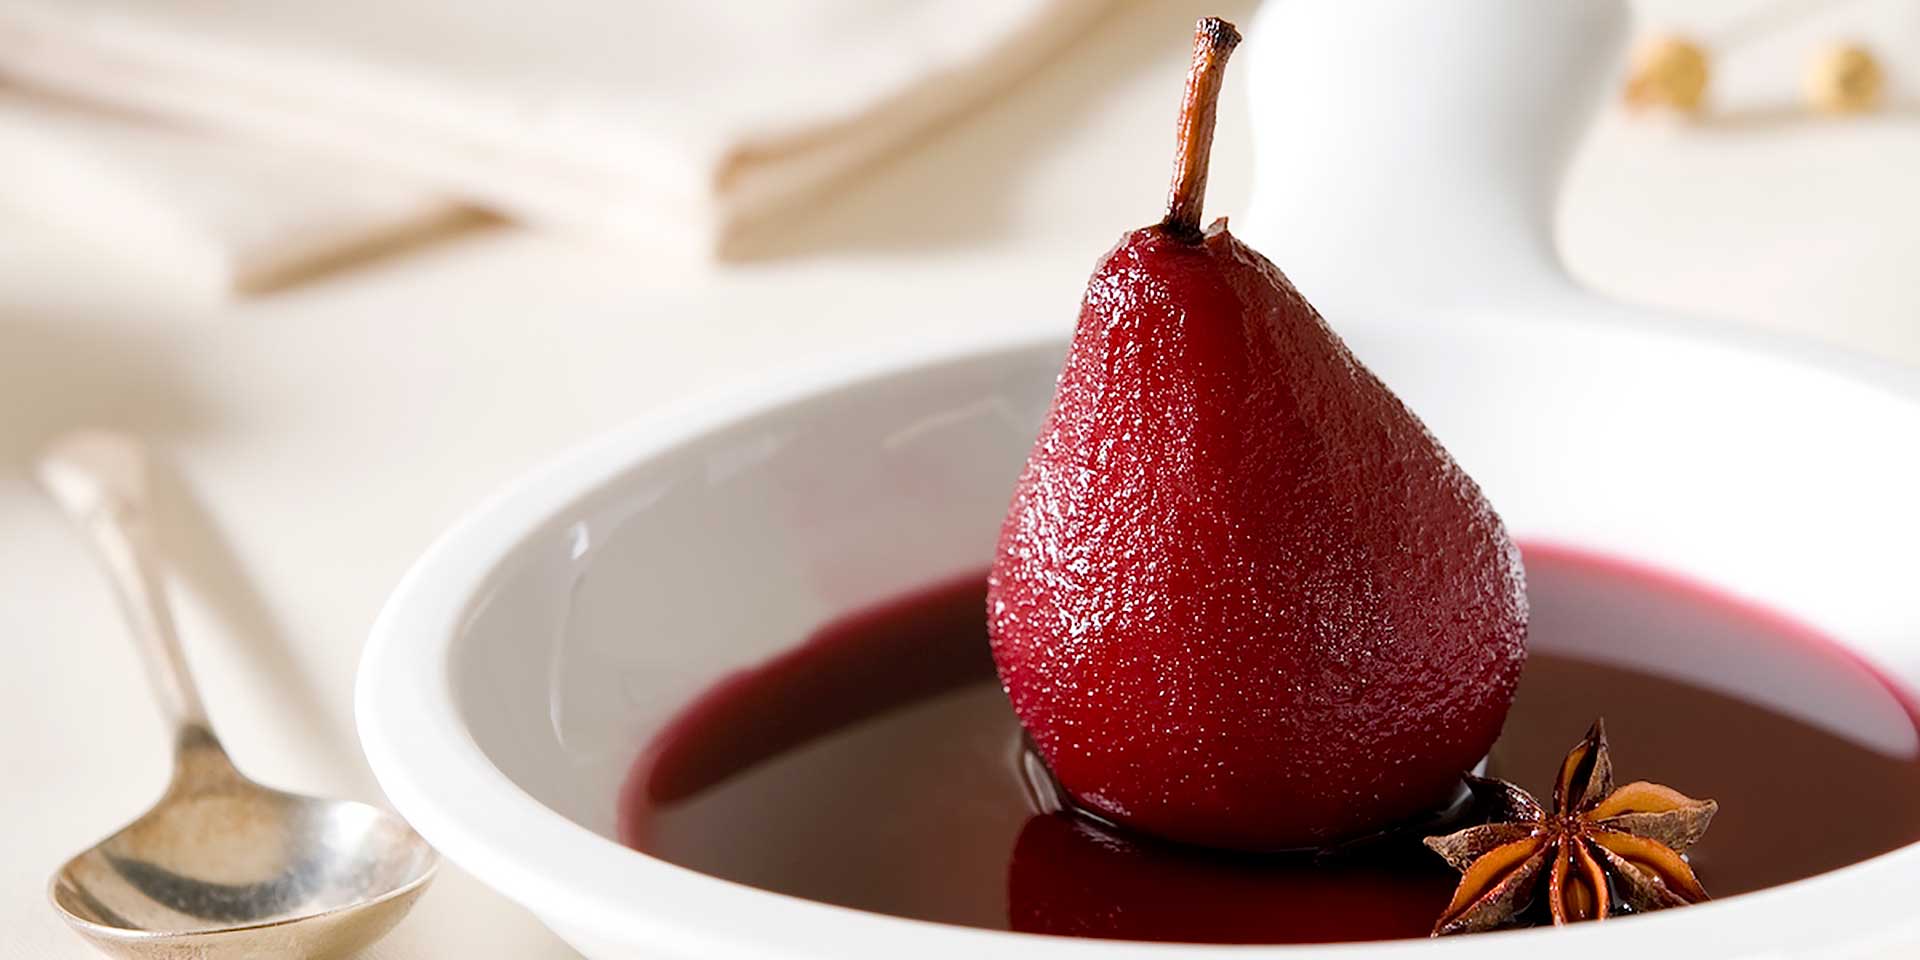 Orange and Star Anise Scented Poached Pears